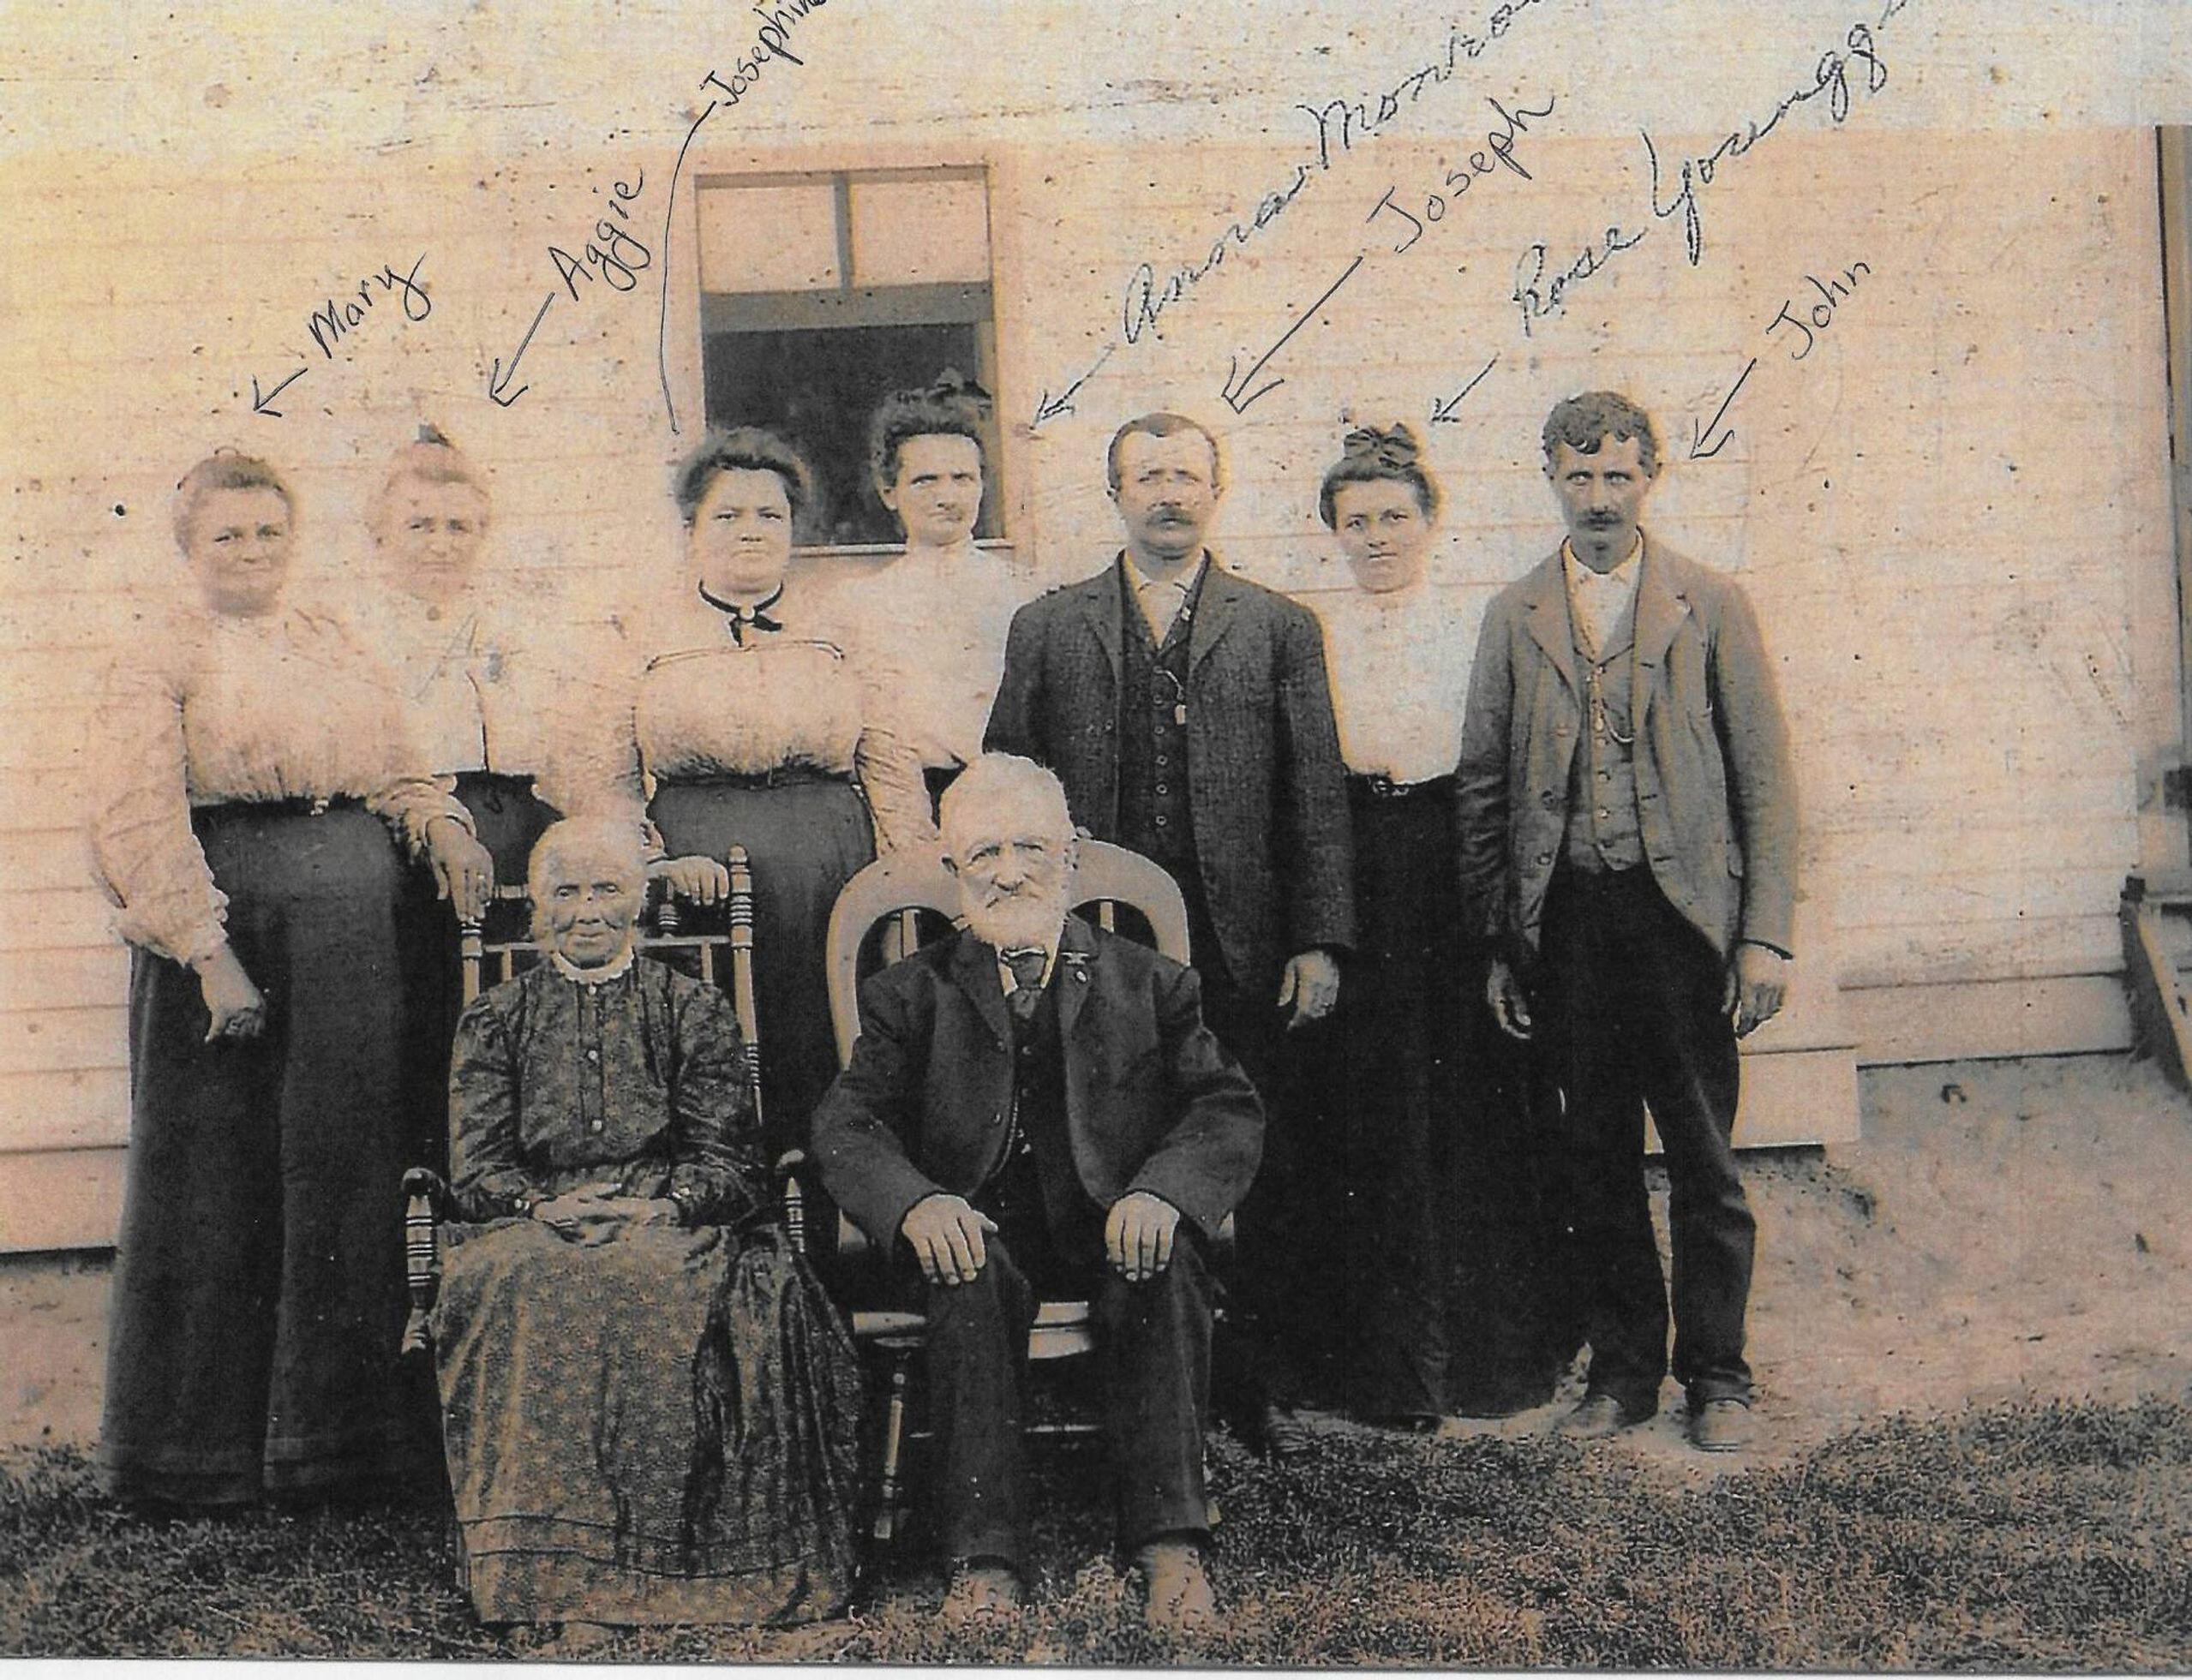 Family of nine posing in front of a building with a window